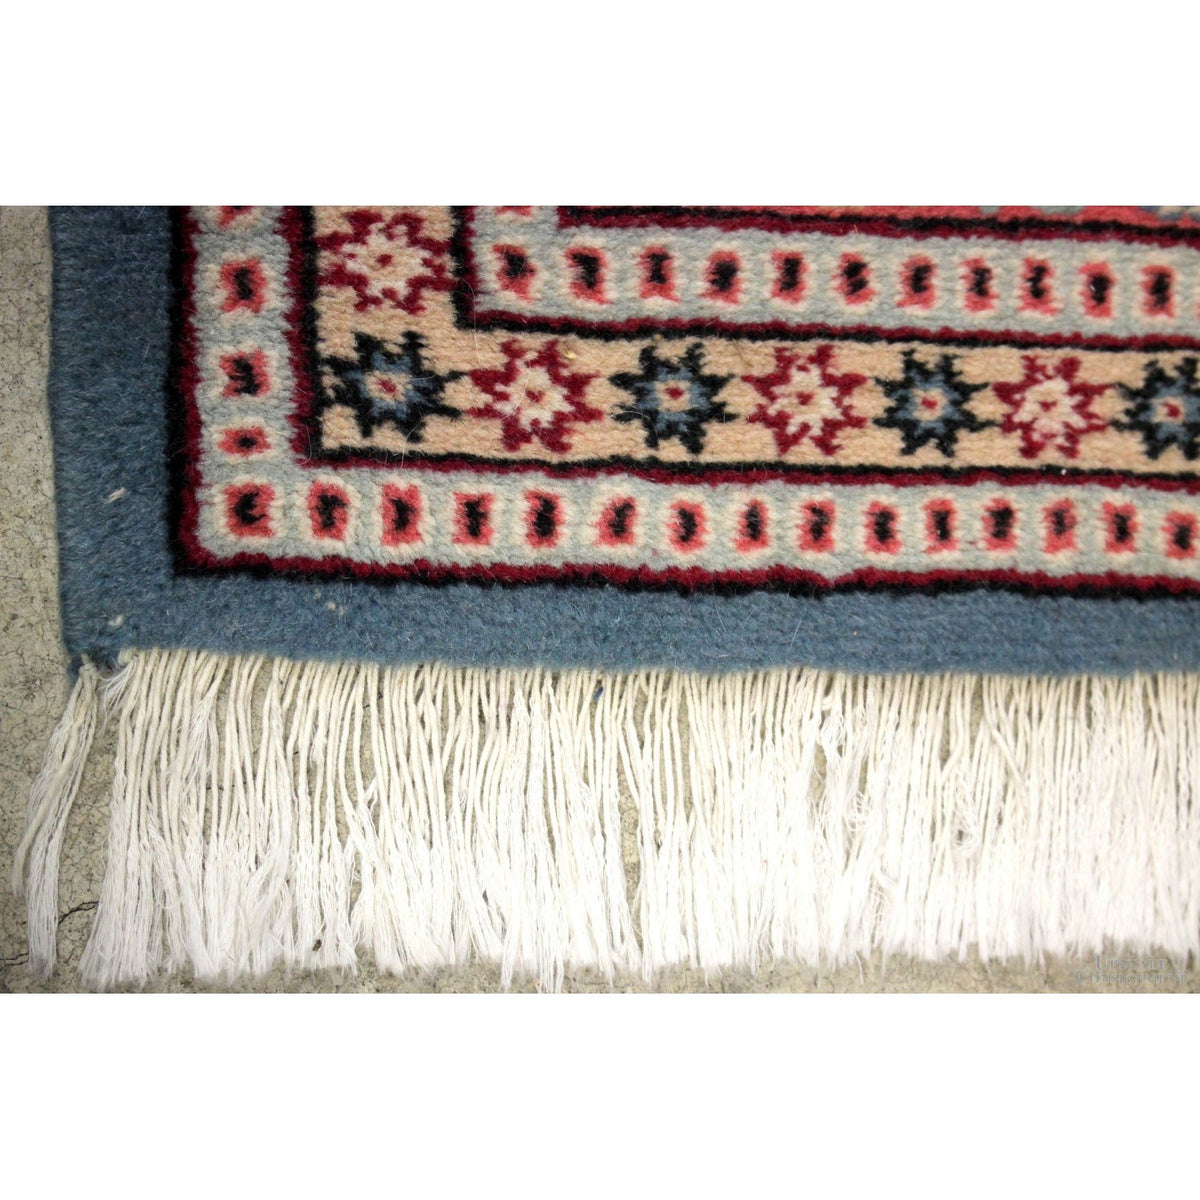 Handwoven 6' 11'' X 11' Pink & Blue Wool Area Rug